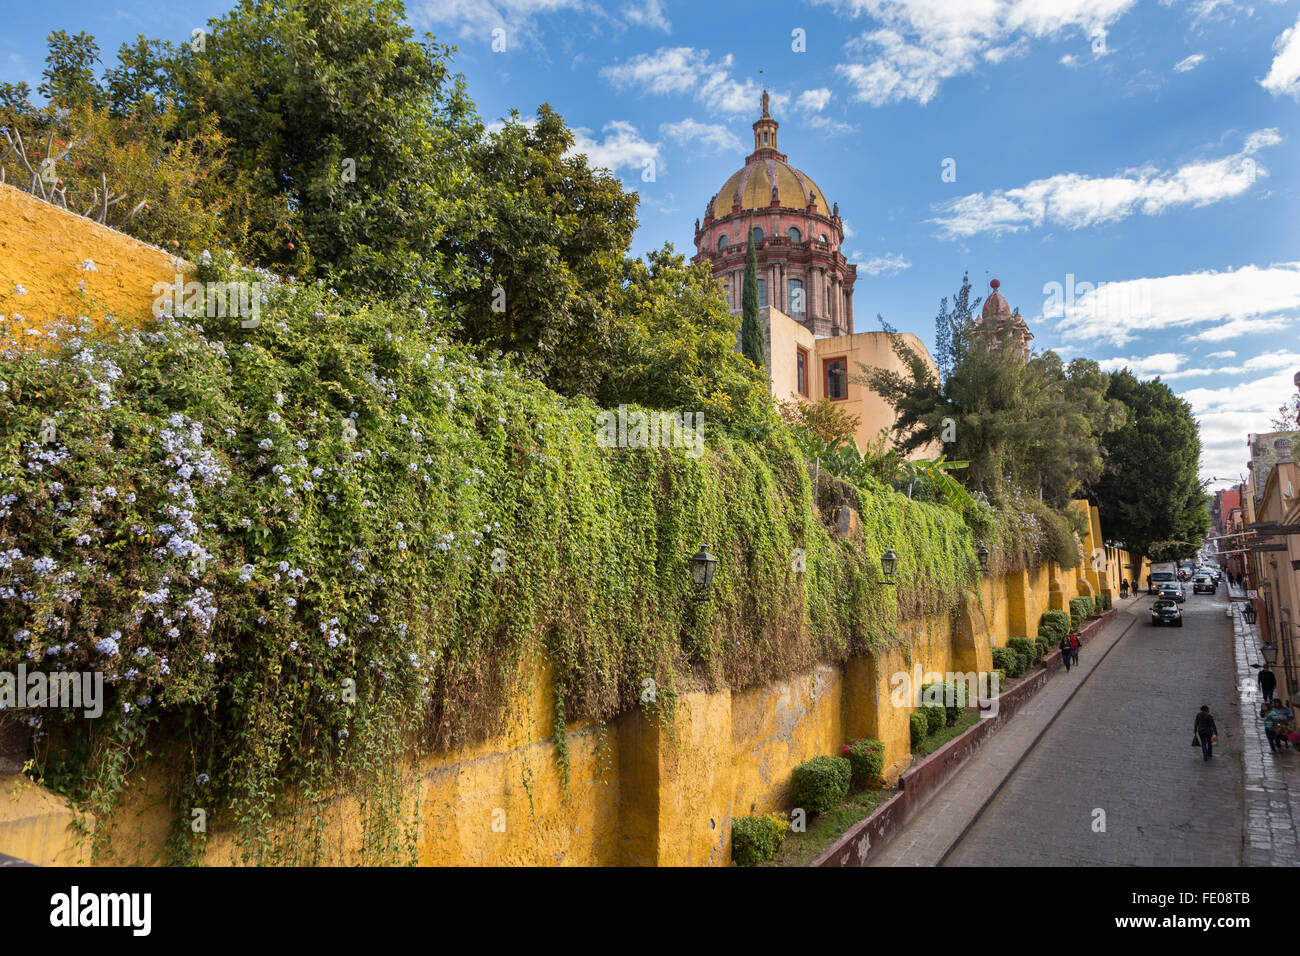 The dome of the Convent of the Immaculate Conception known as the Nuns along Canal Street in the historic center of San Miguel de Allende, Mexico. Stock Photo